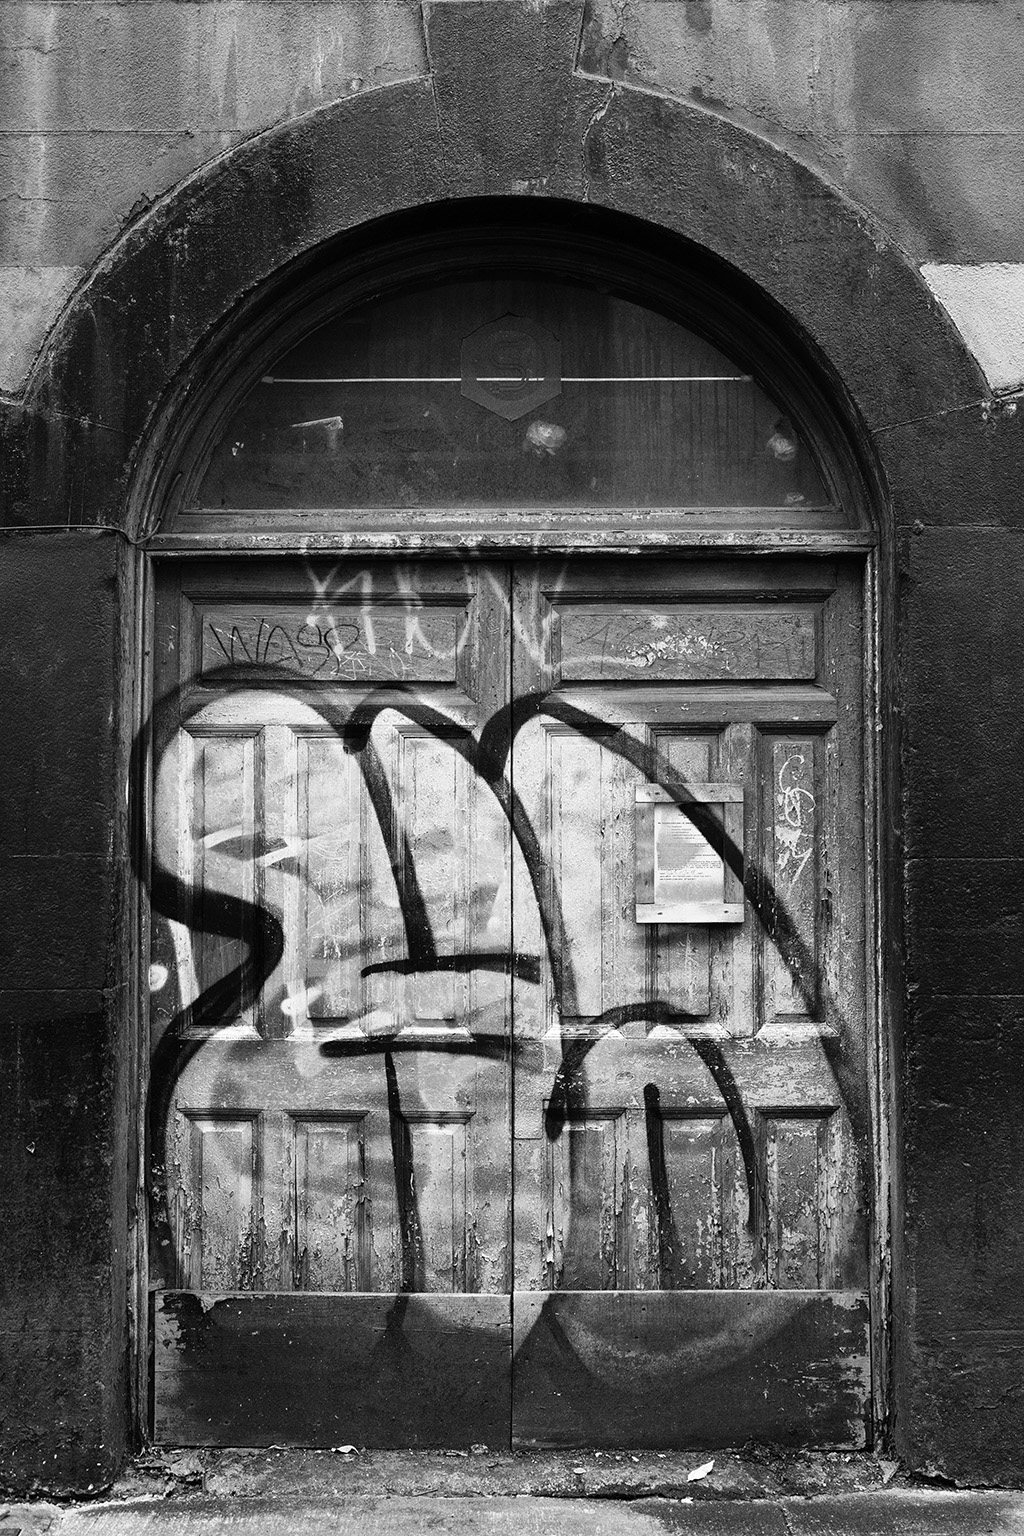 A black and white photograph of a graffiti-covered double door in Dublin.